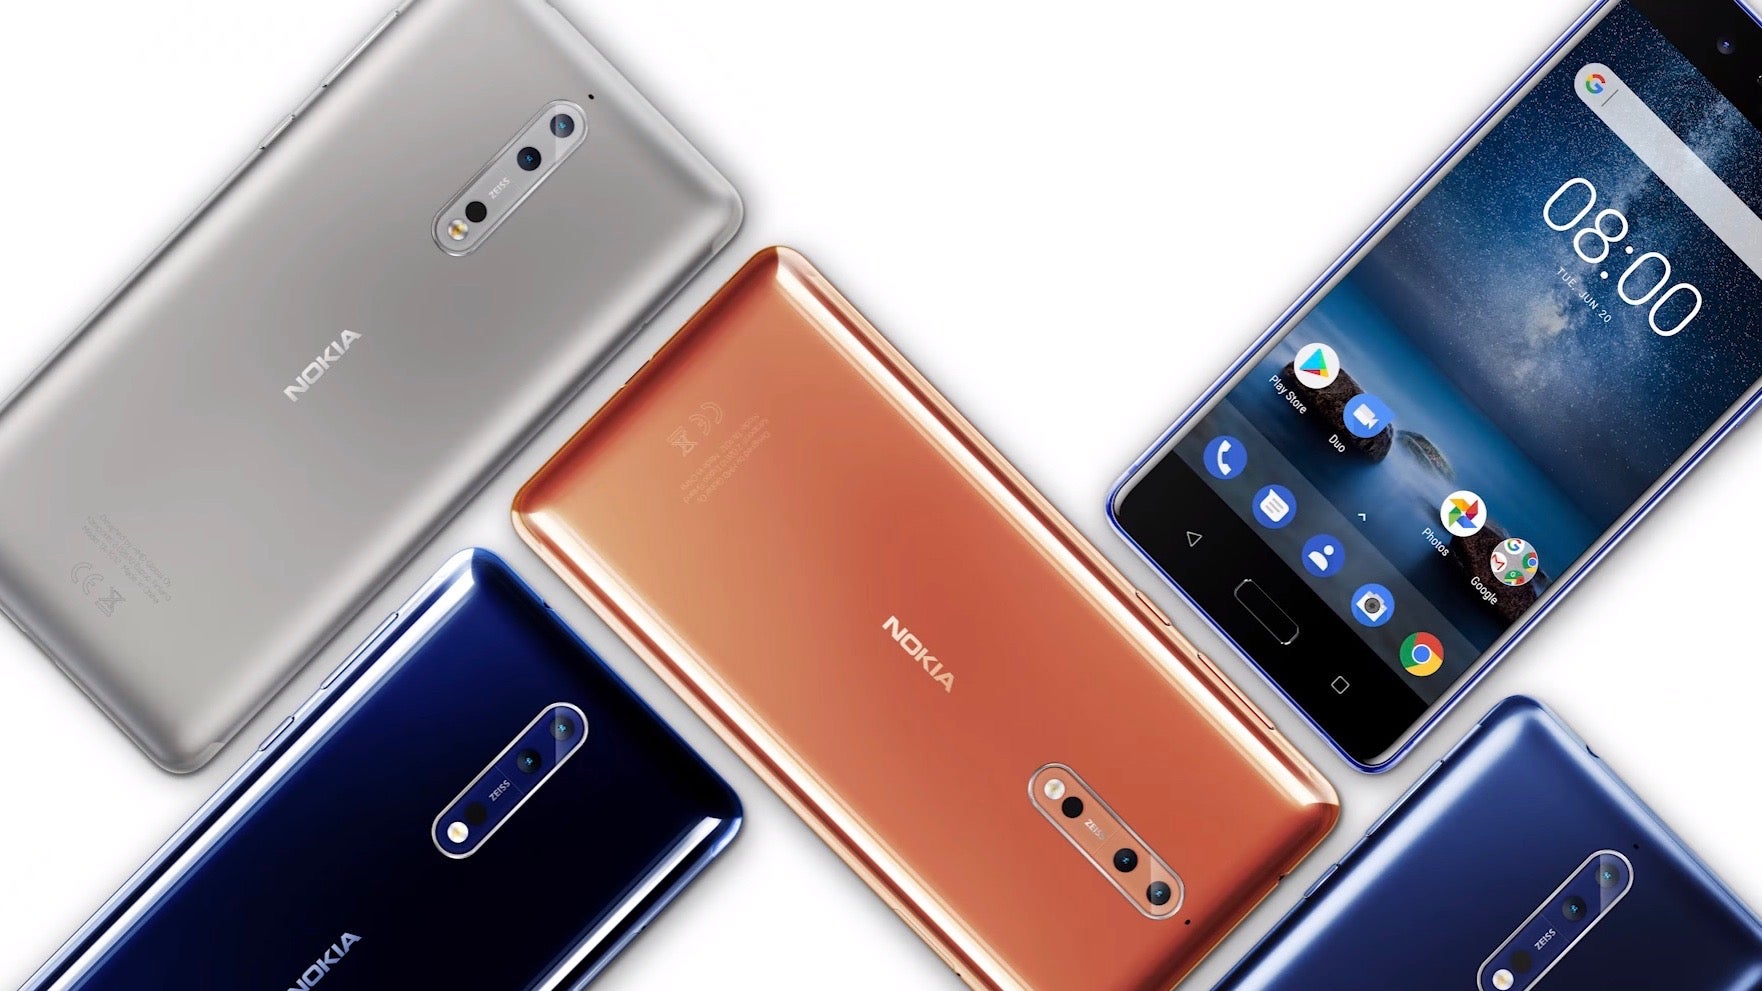 Nokia 8 price, release date and carrier availability